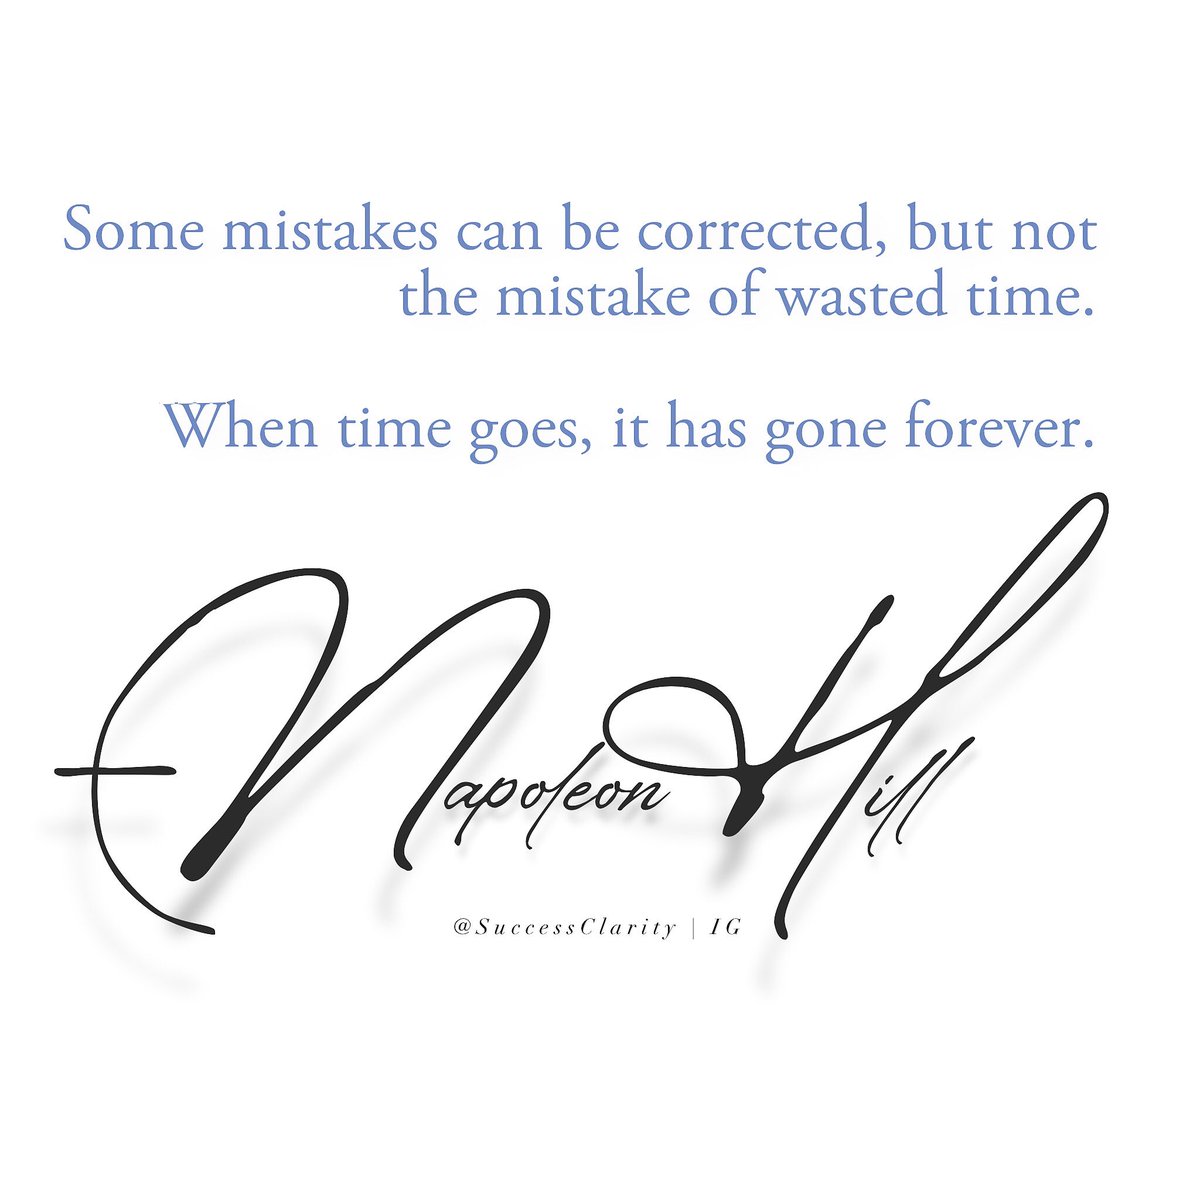 “Most misfortunes are the results of misused time.” —Napoleon Hill

instagram.com/p/B4h-0ERF7zR/…

#NapoleonHill #TheLawofSuccess #LawOfSuccess #TheScienceOfSuccess #ScienceOfSuccess #Achieve #Achievement #Quote #Quotes #Success #Happiness #Wealth #TheScienceOfAchievement #ThinkAndGrow